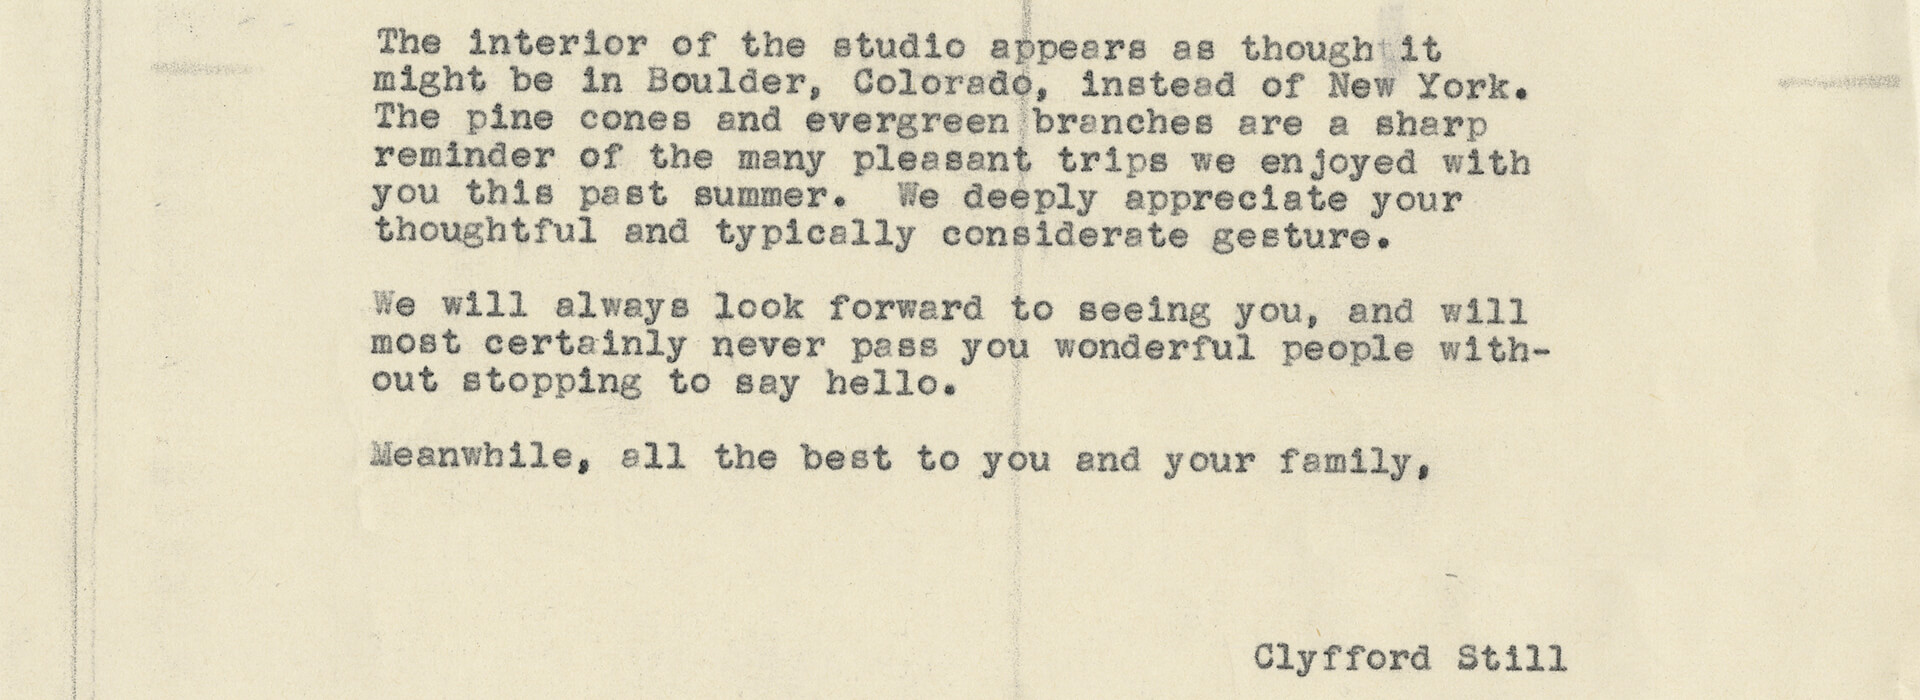 Typed letter from Clyfford Still